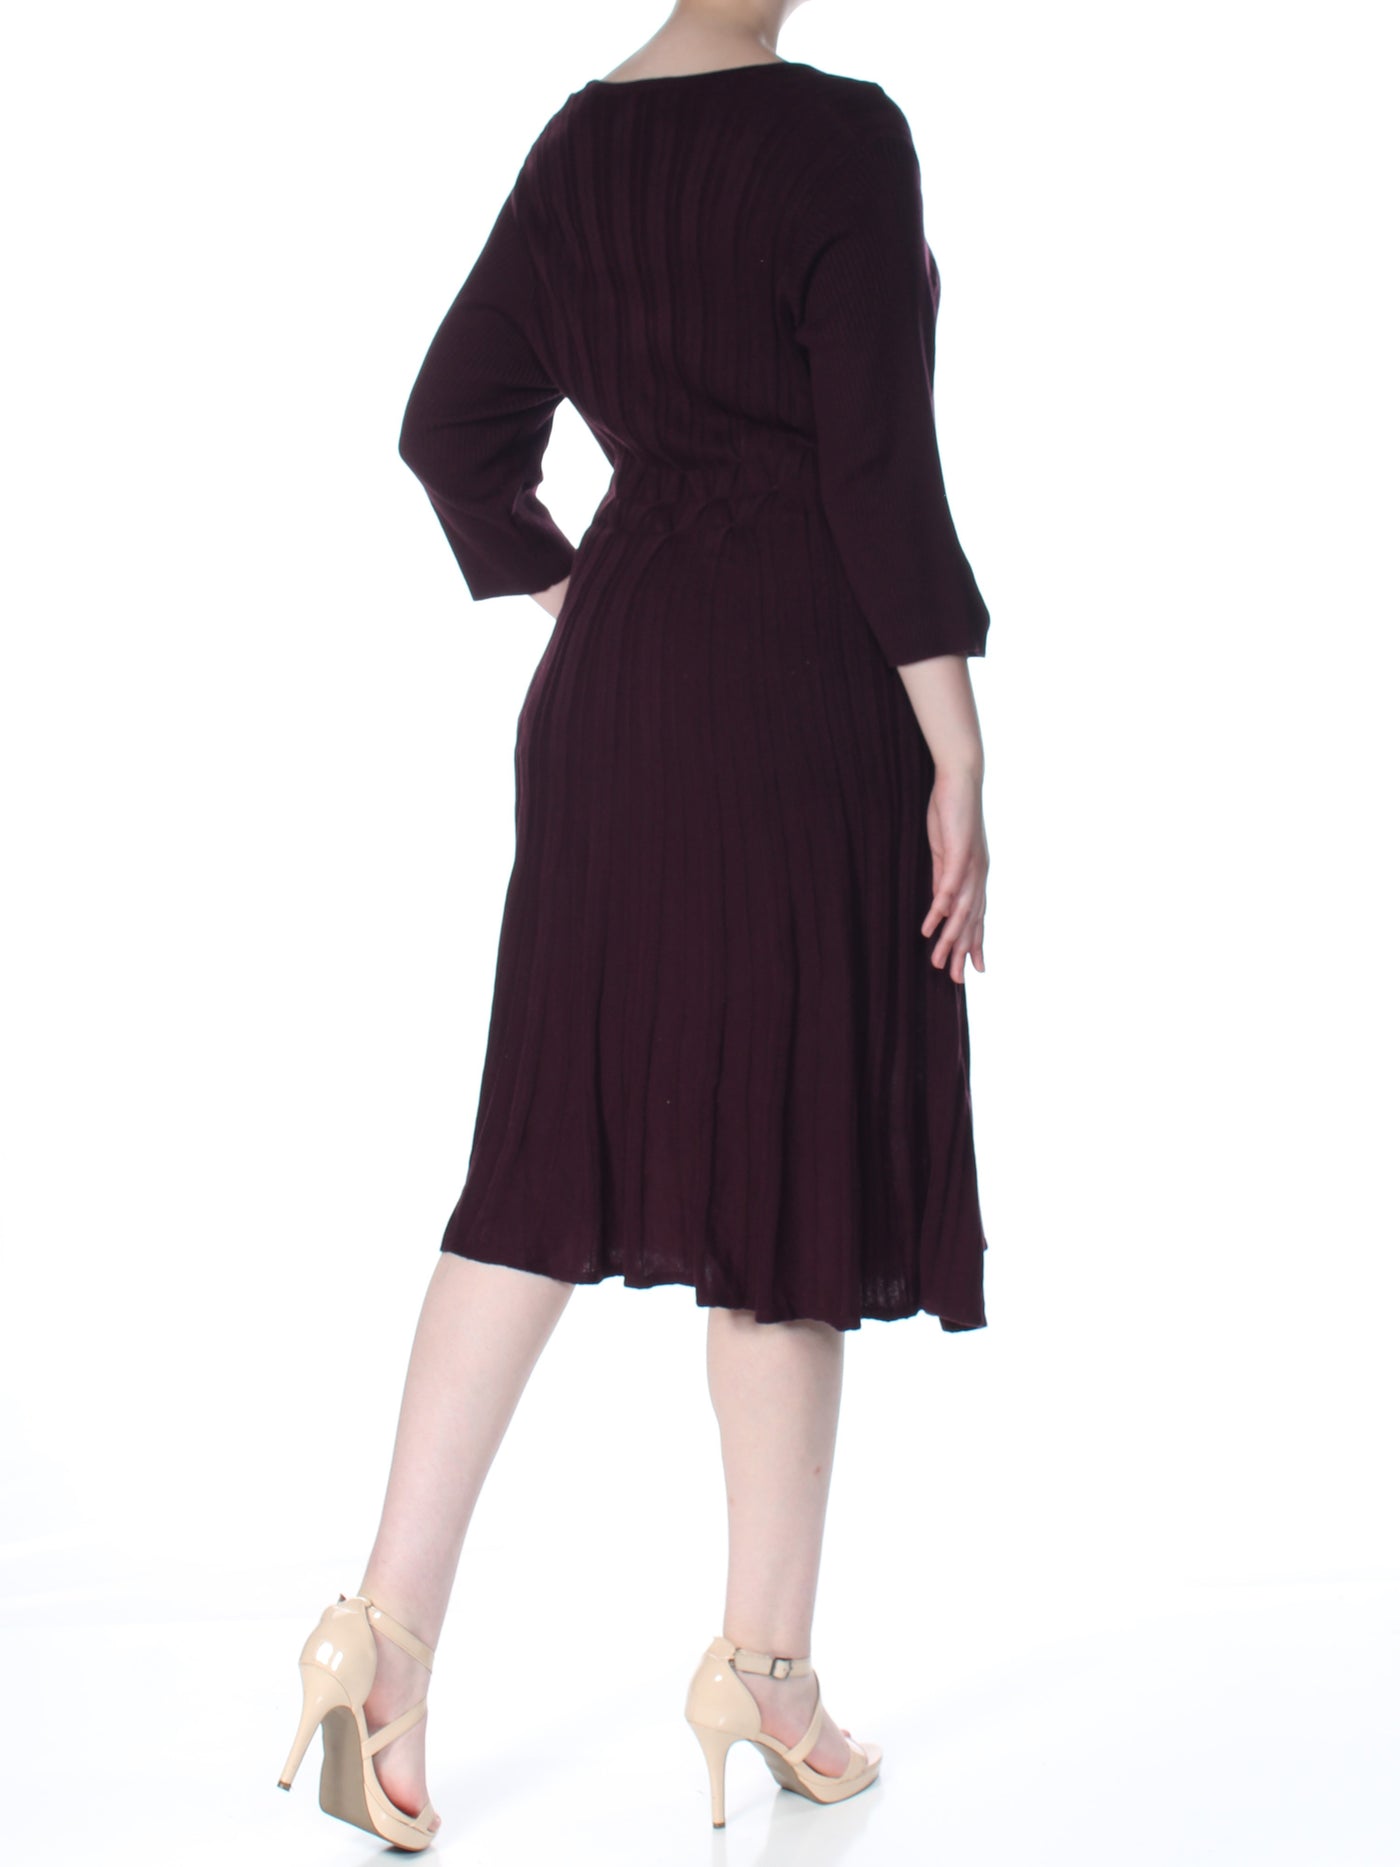 CONNECTED APPAREL Womens Purple Heather 3/4 Sleeve V Neck Below The Knee Fit + Flare Dress